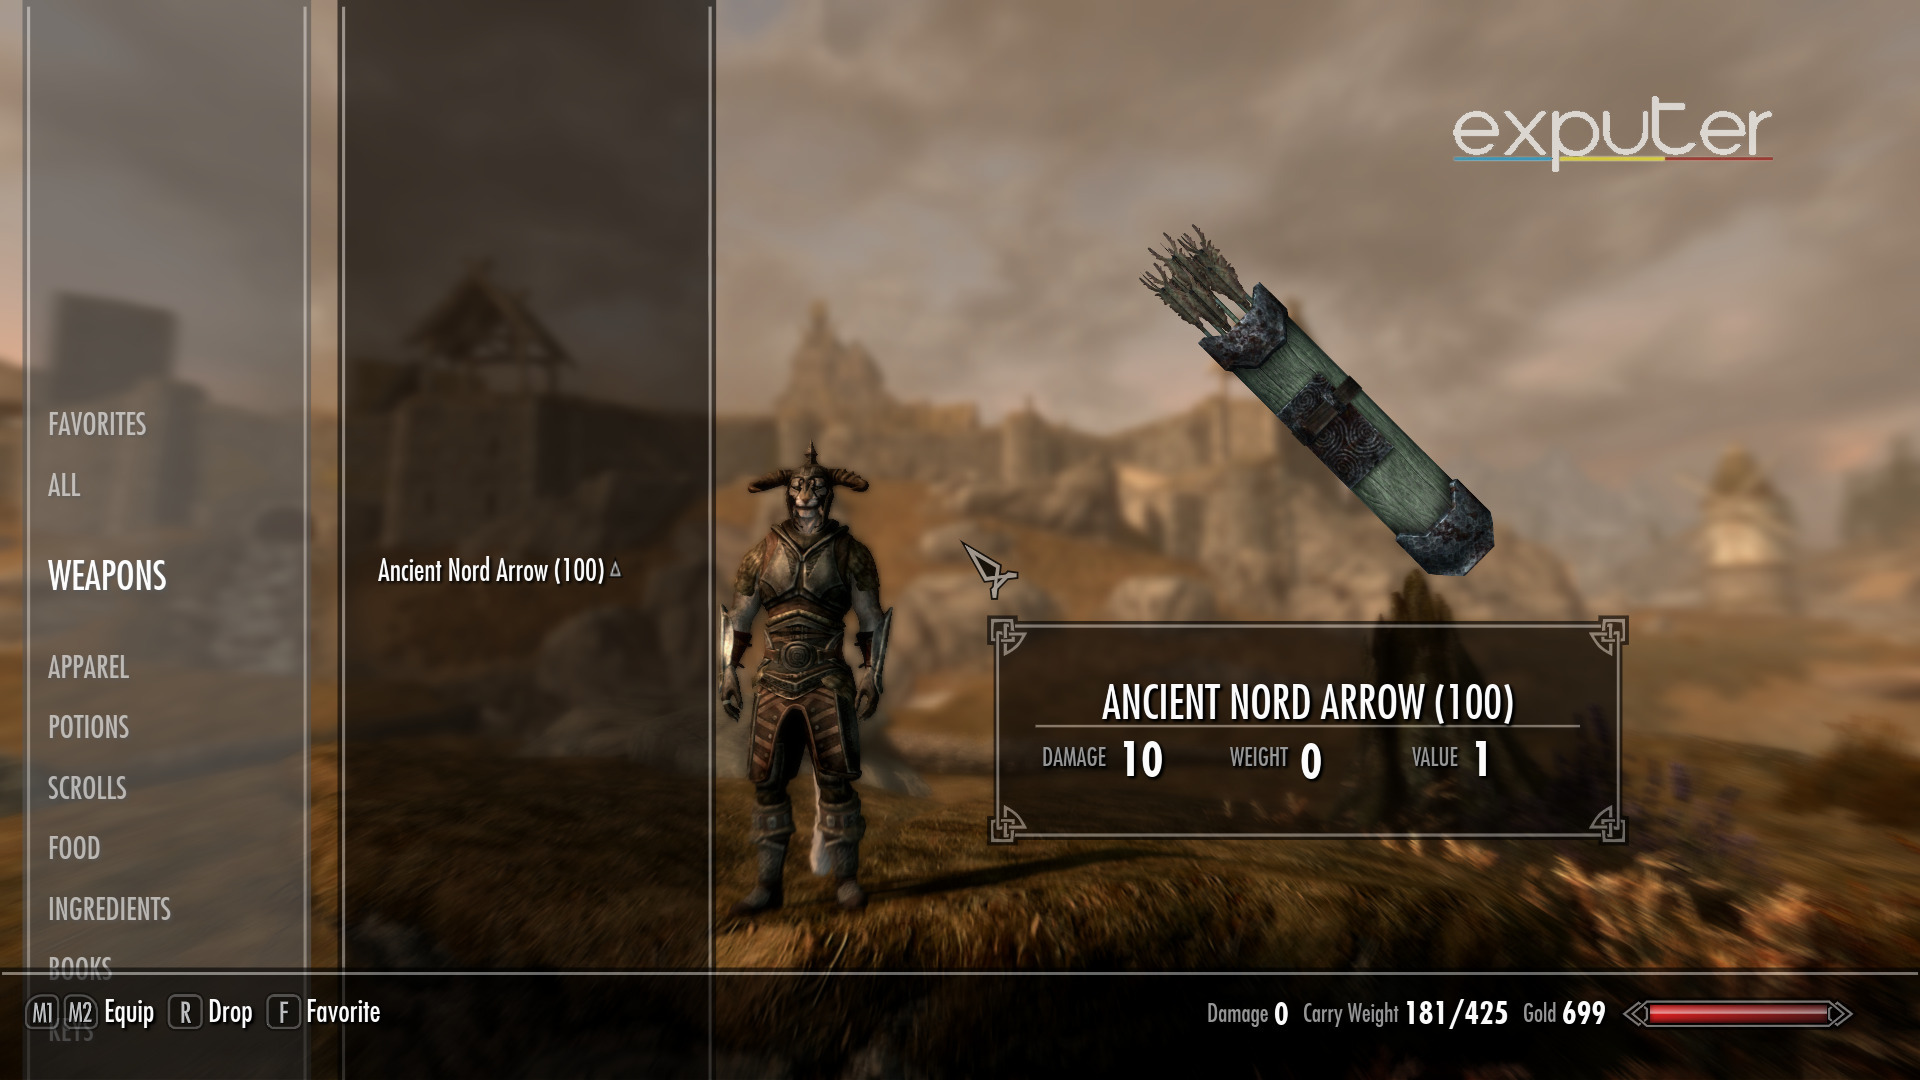 The Ancient Nord Arrow.